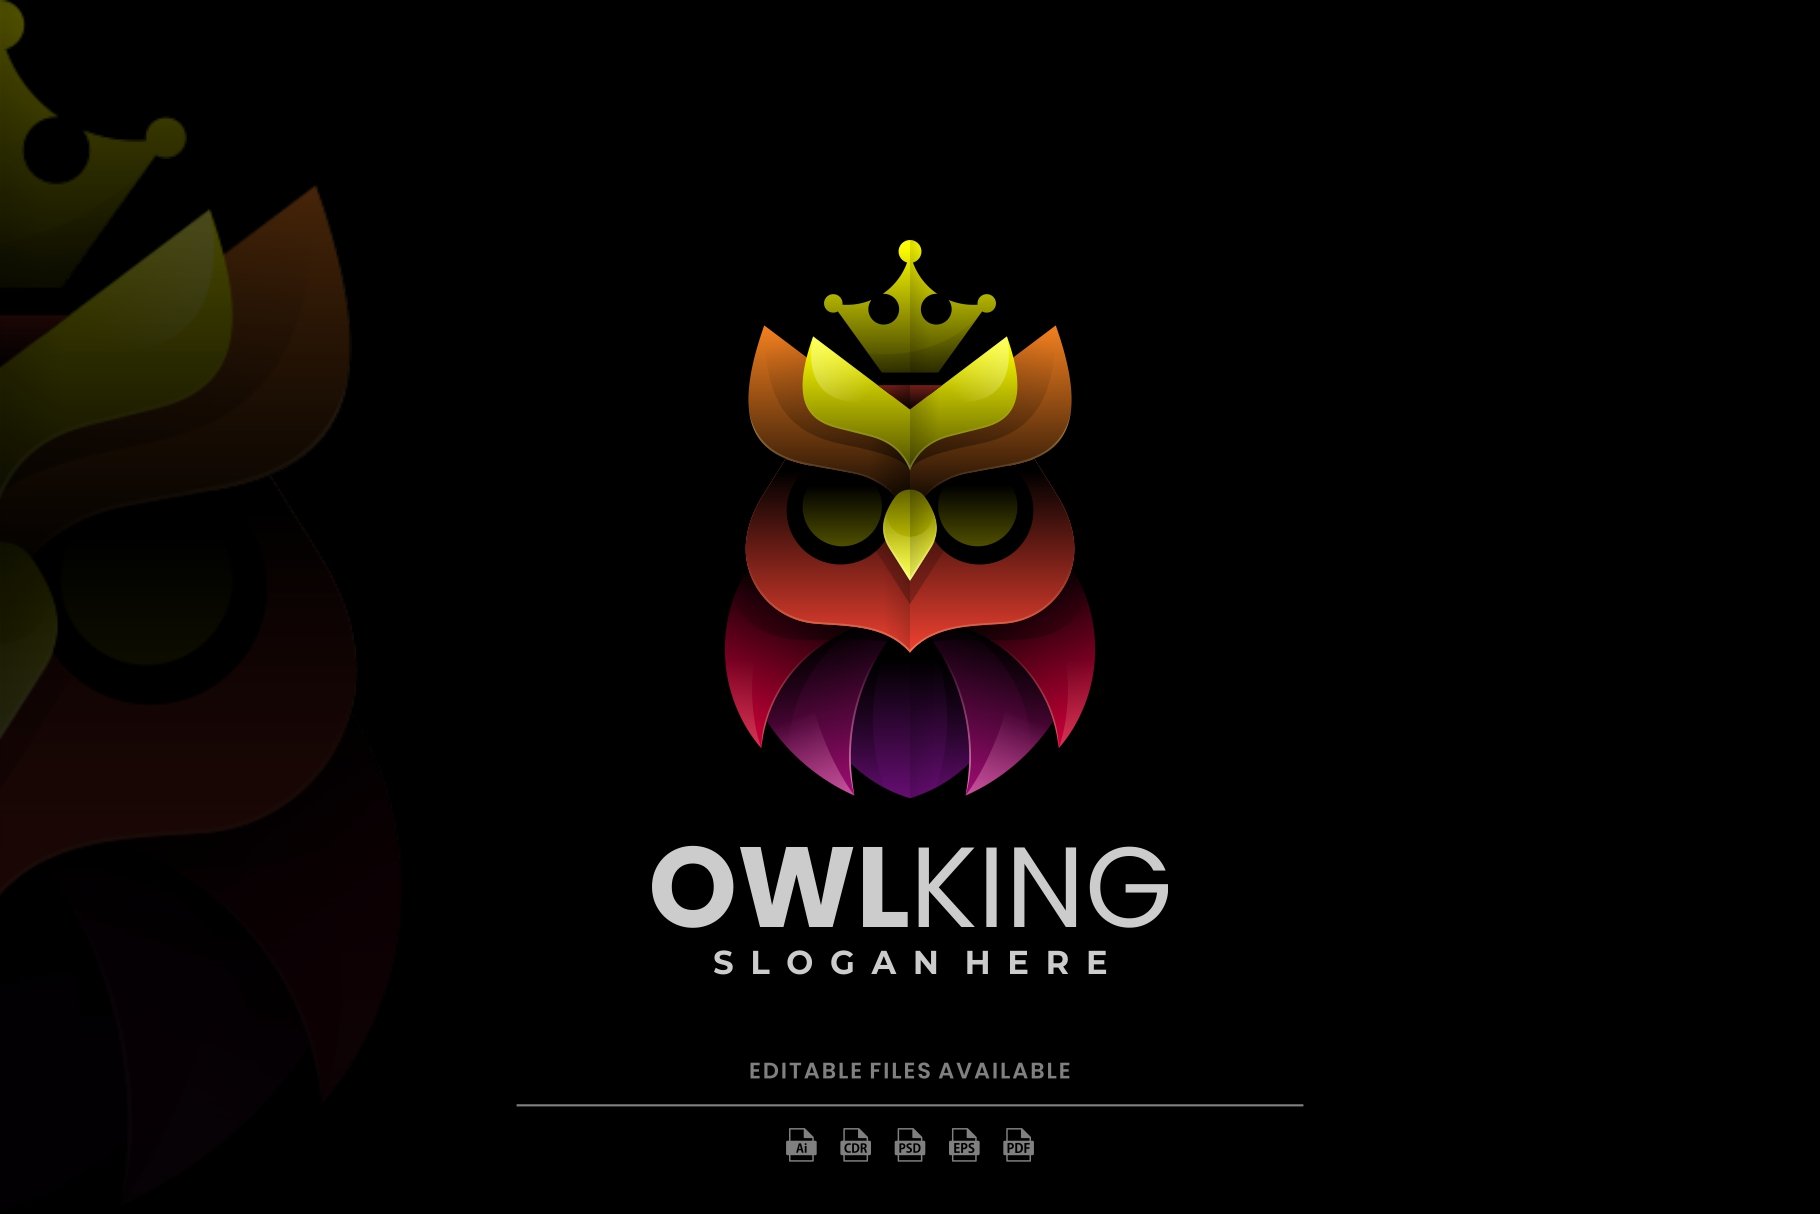 Owl King Colorful Logo cover image.